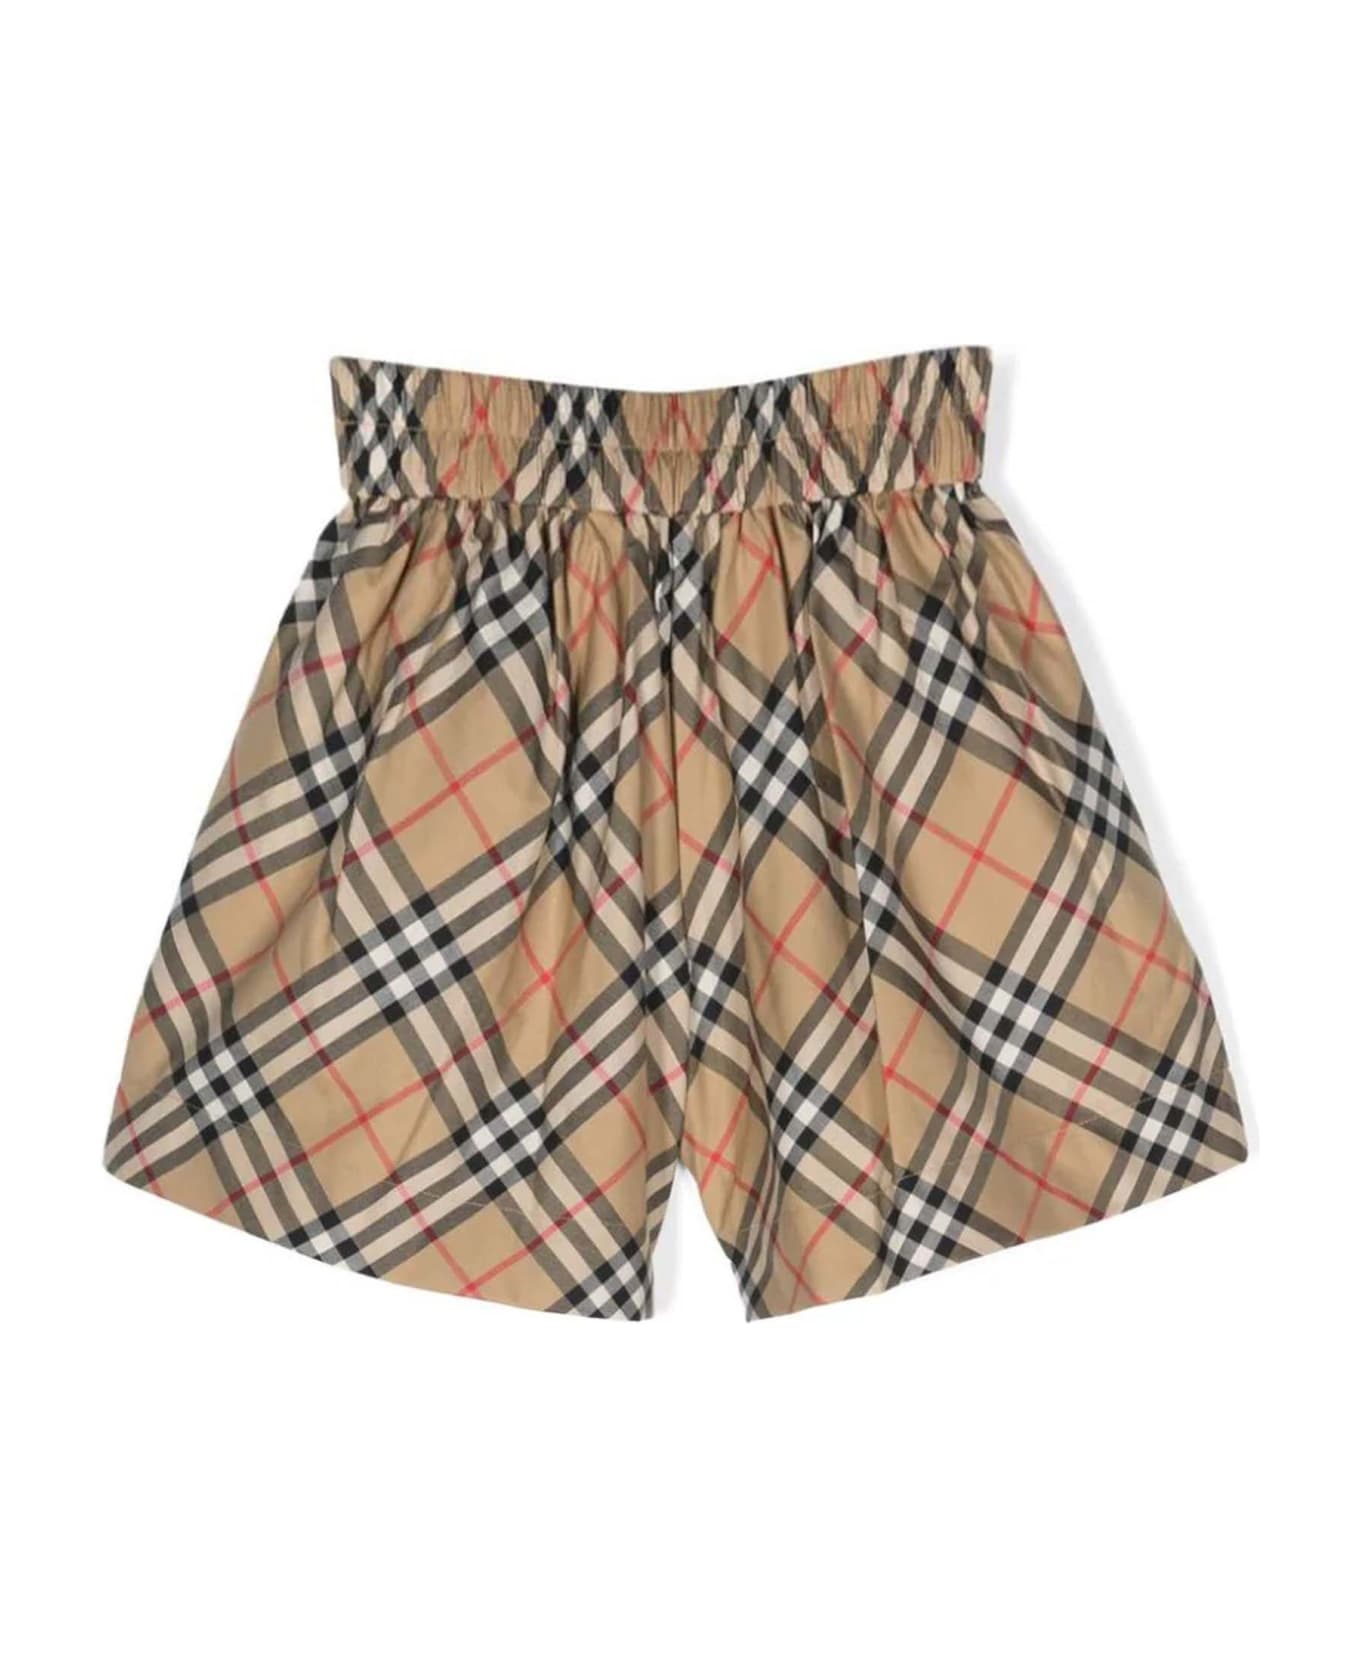 Burberry Vintage Check-pattern Cotton Shorts - Archive Beige Ip Check ボトムス